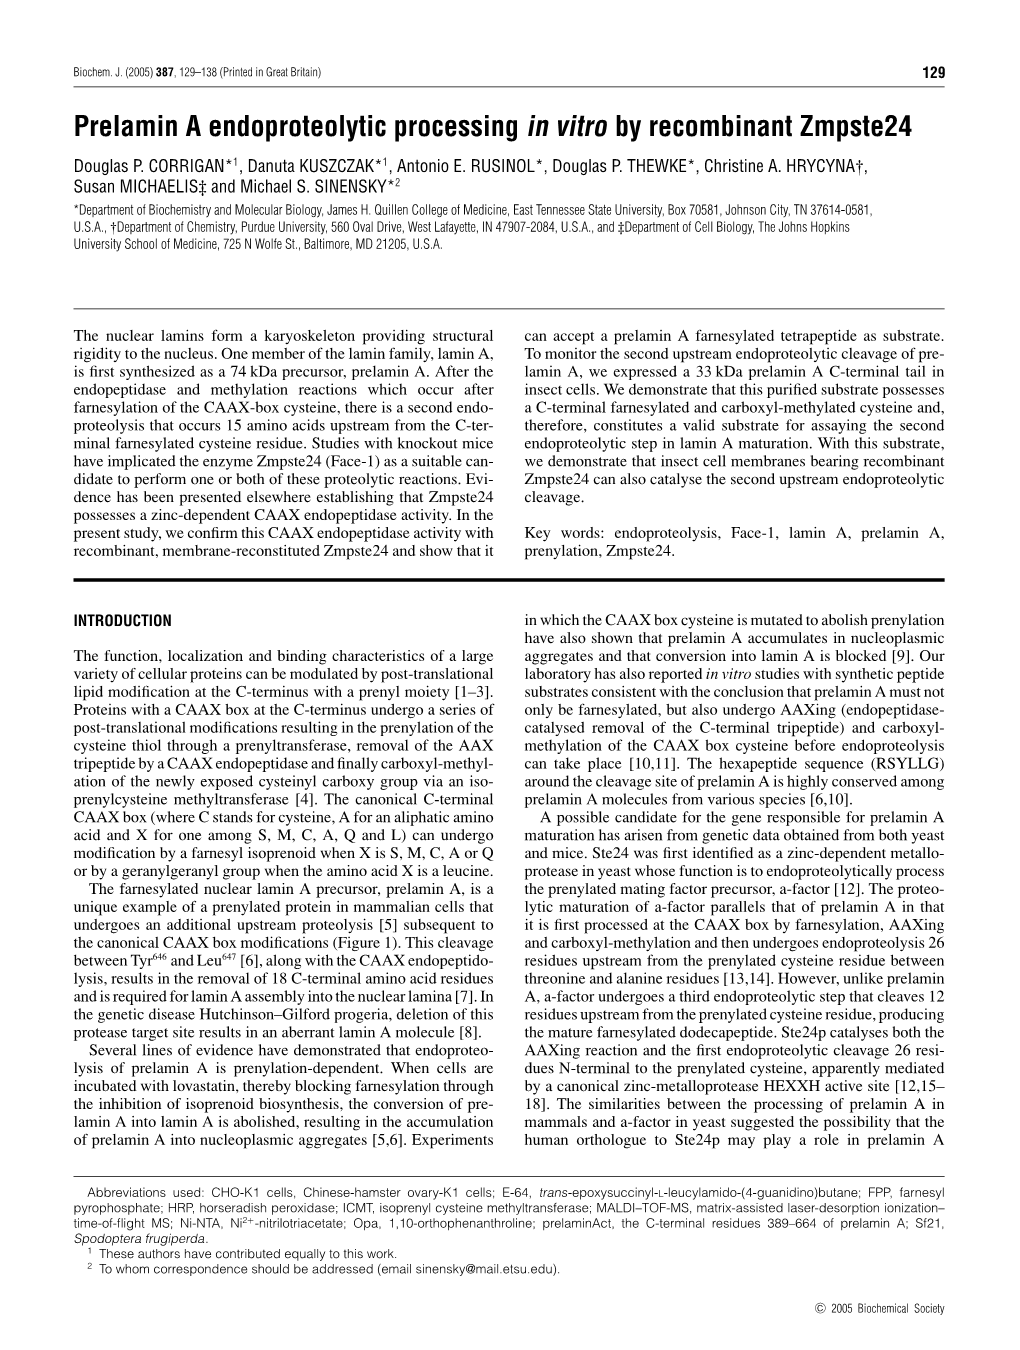 Prelamin a Endoproteolytic Processing in Vitro by Recombinant Zmpste24 Douglas P